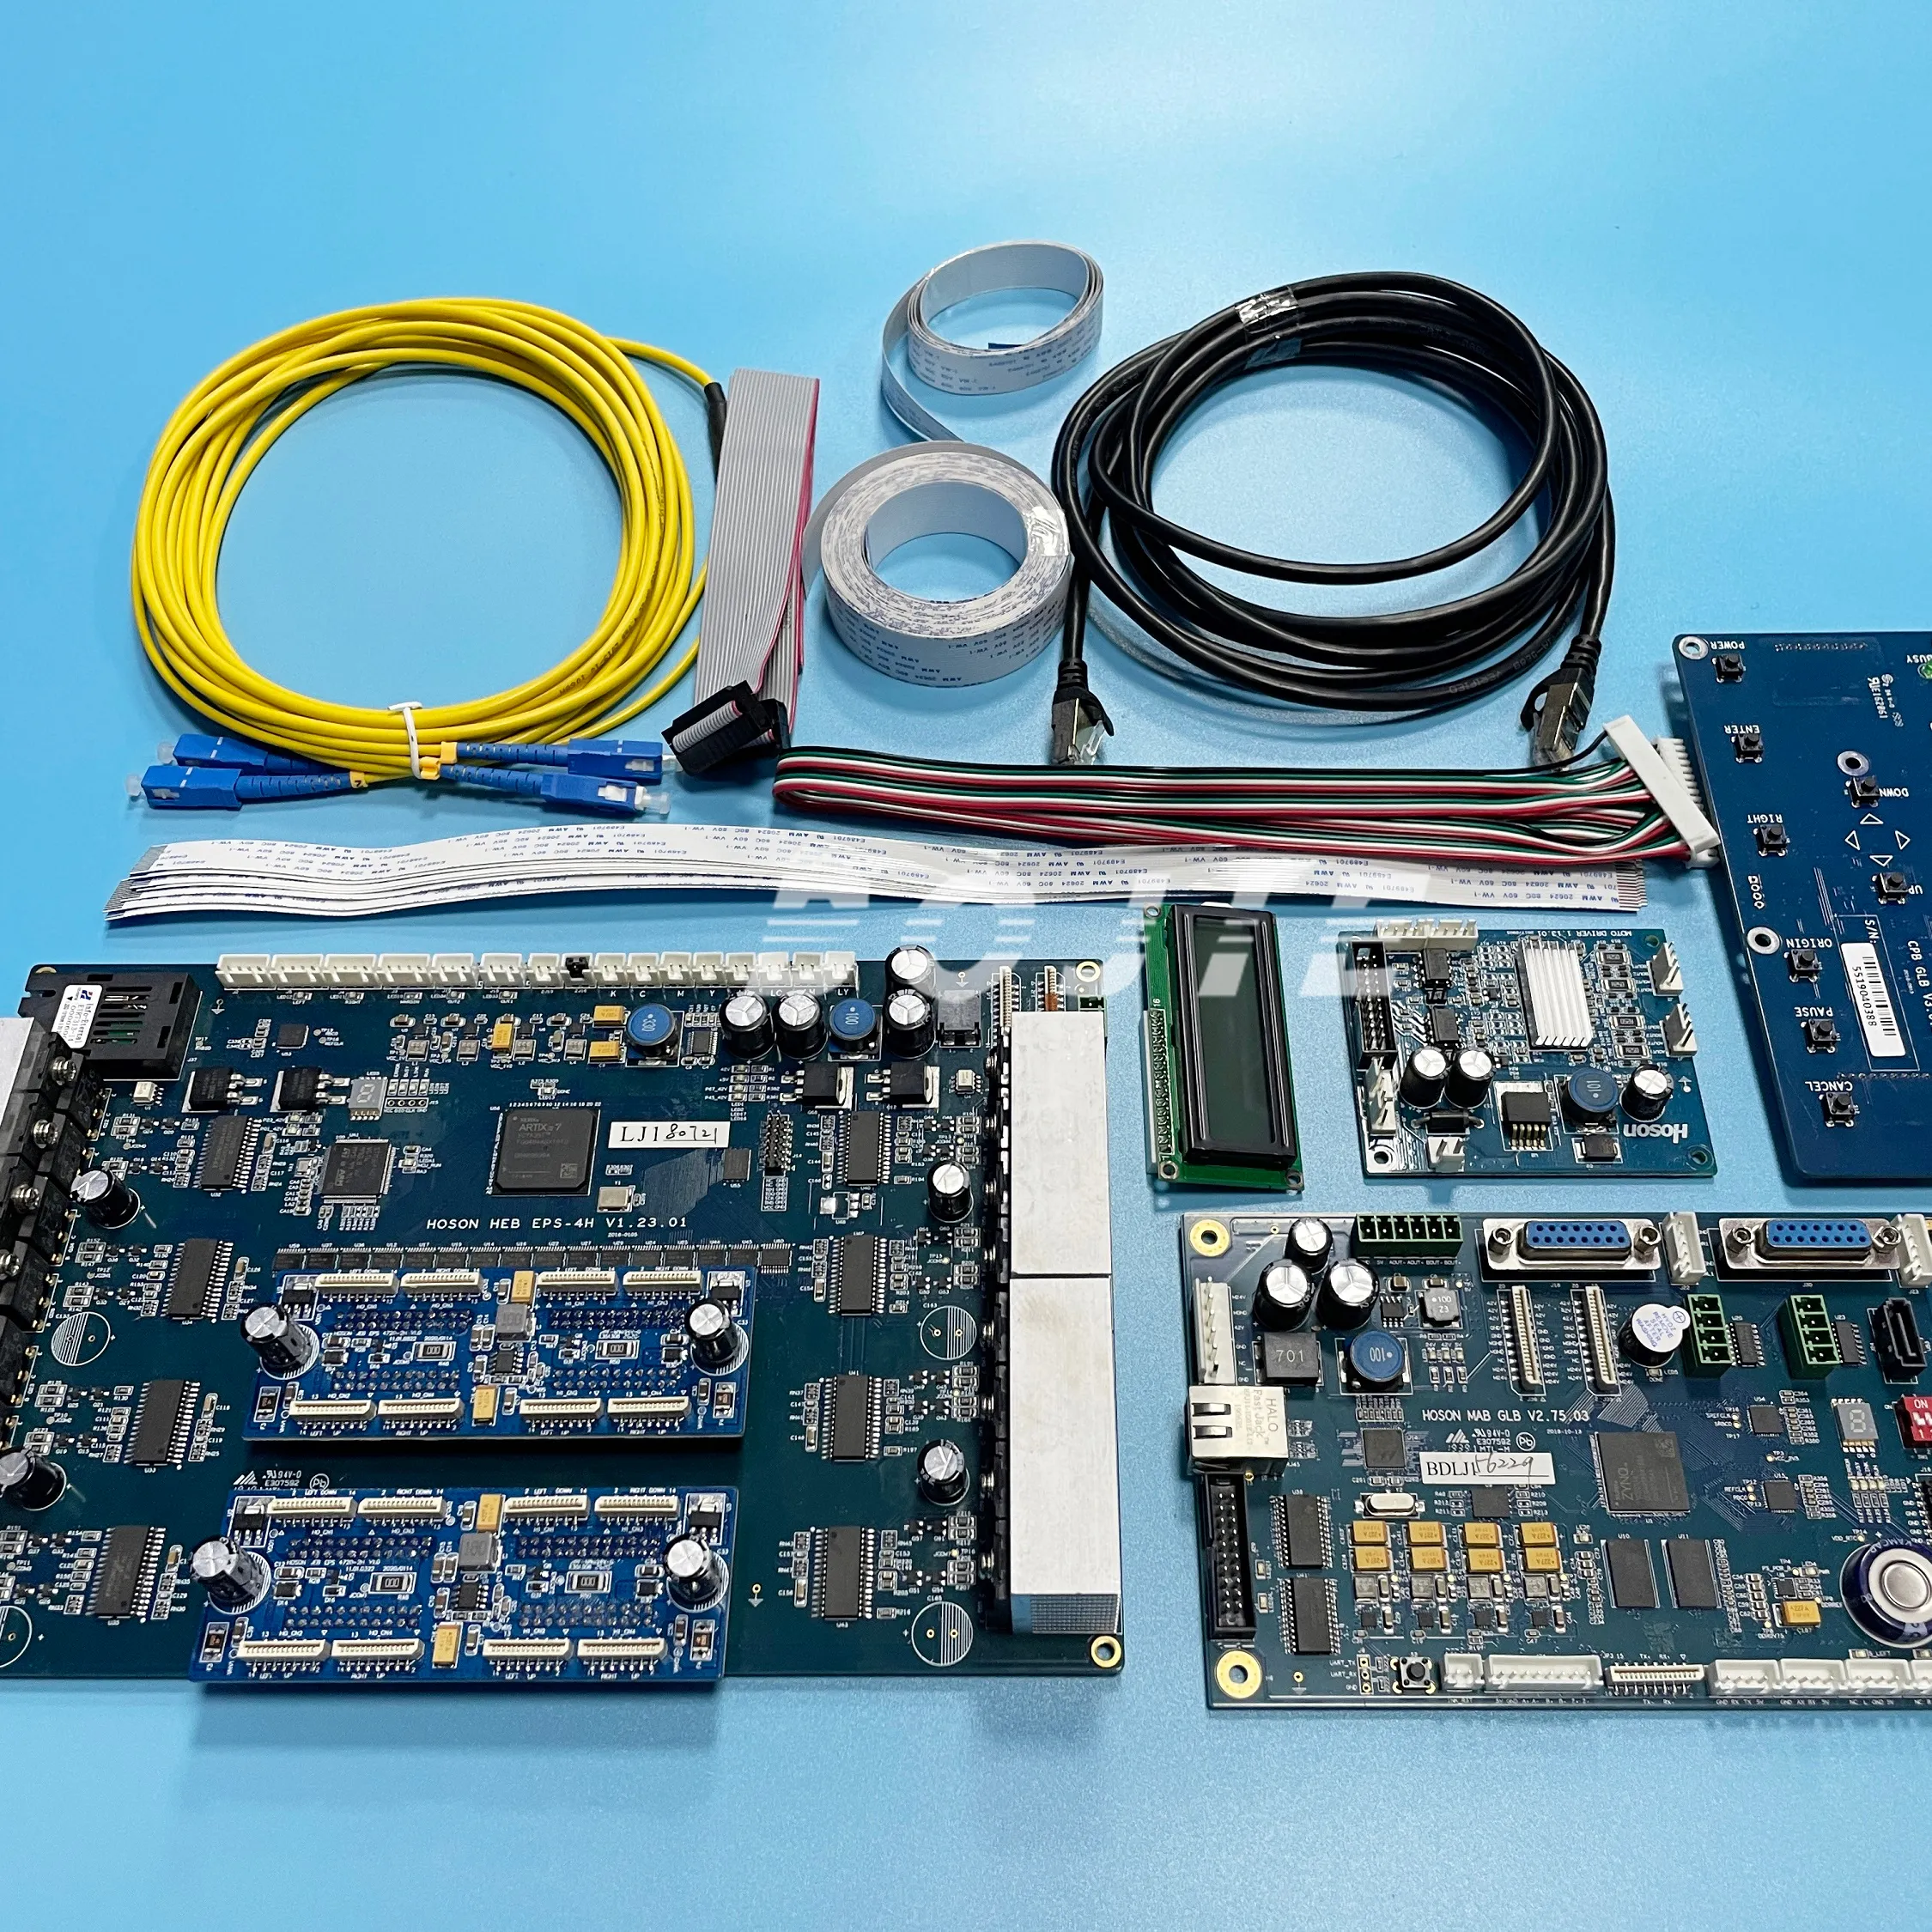 Brand New Hoson I3200 4H Complete Electronic Kit Board Used To Upgrade And Modify Printer With 3 Months Warranty